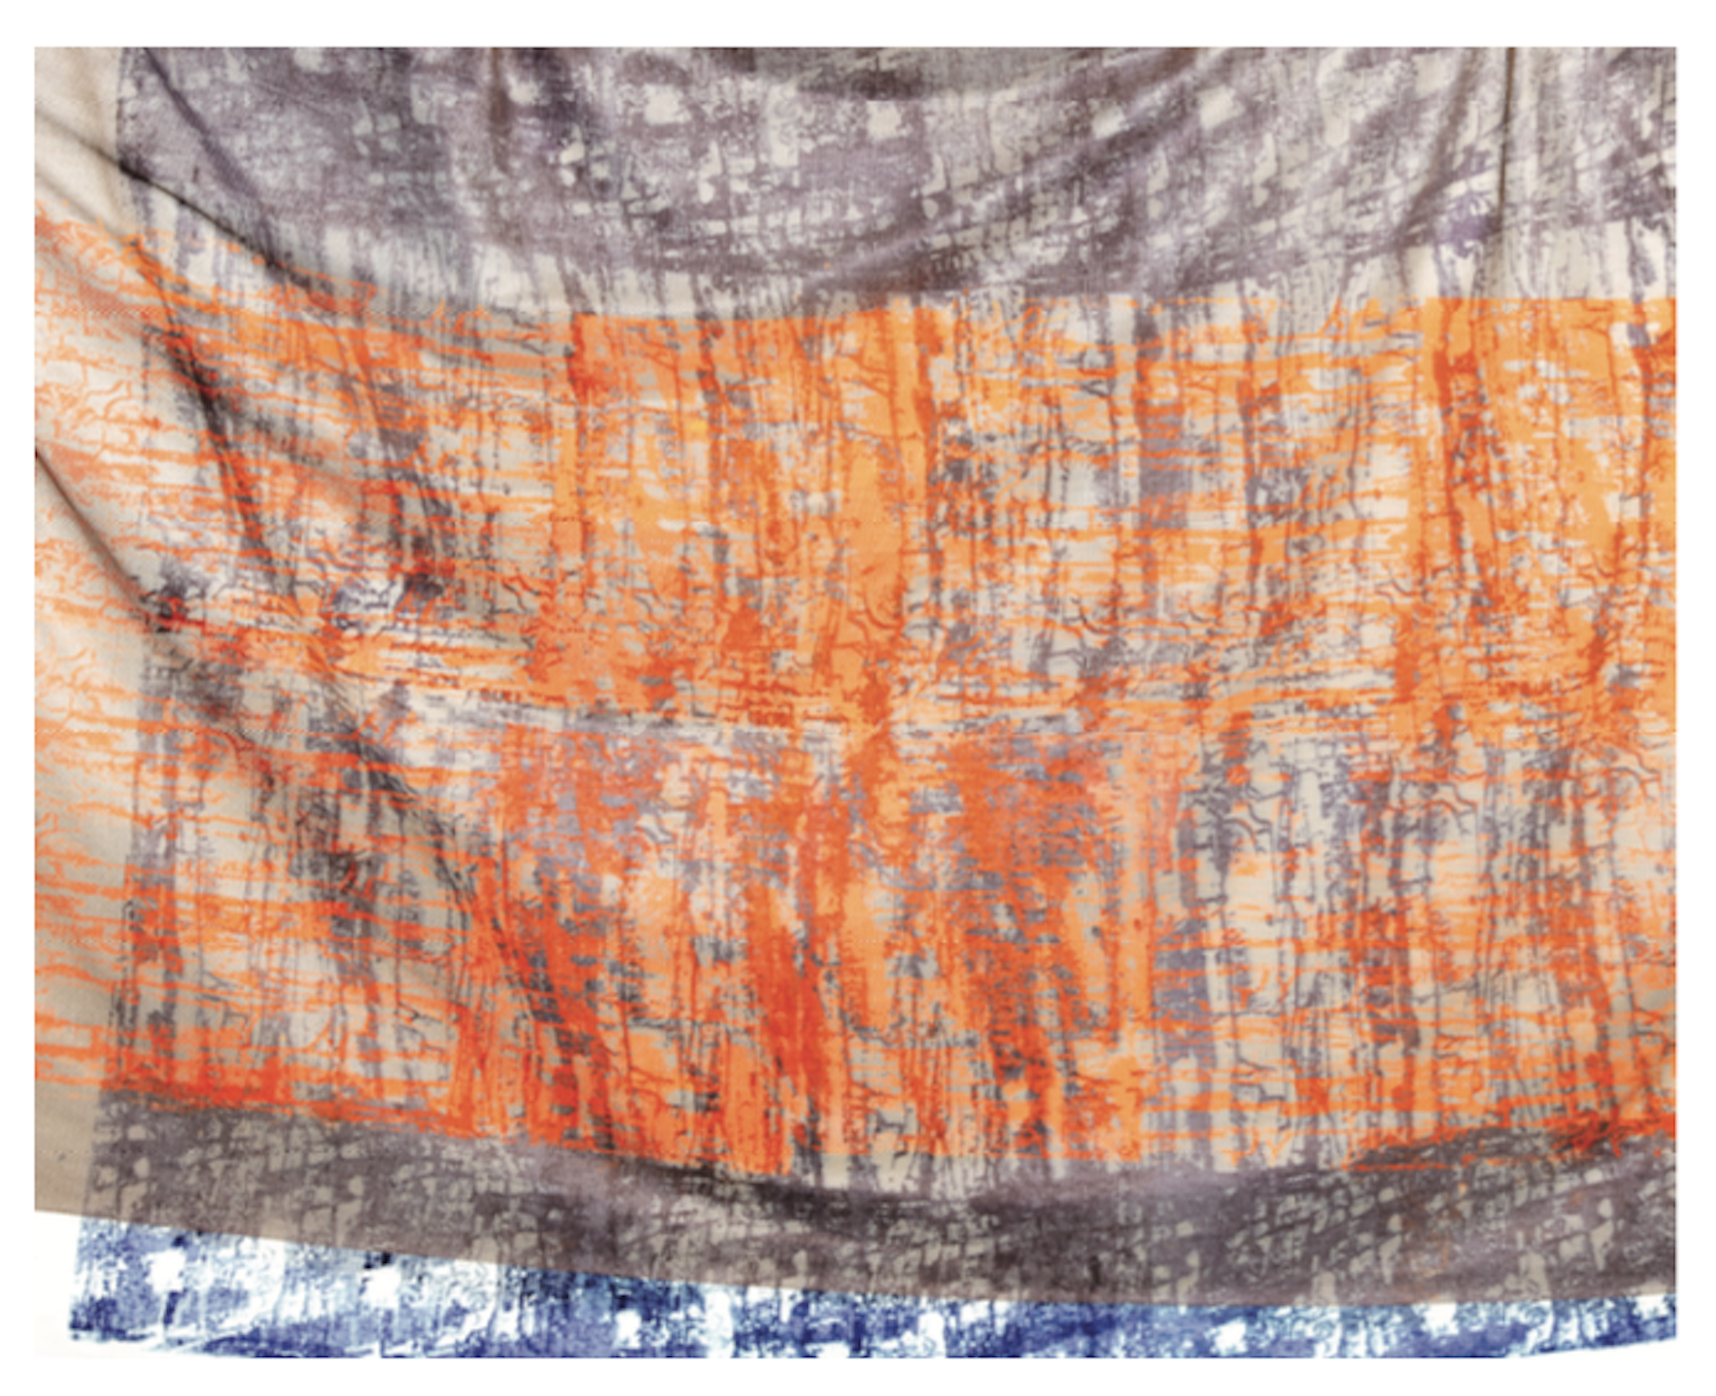 “The Unbearable Lightness of Being” Milan Kundera _ Silkscreen printing on transparent textiles, with moiré effects